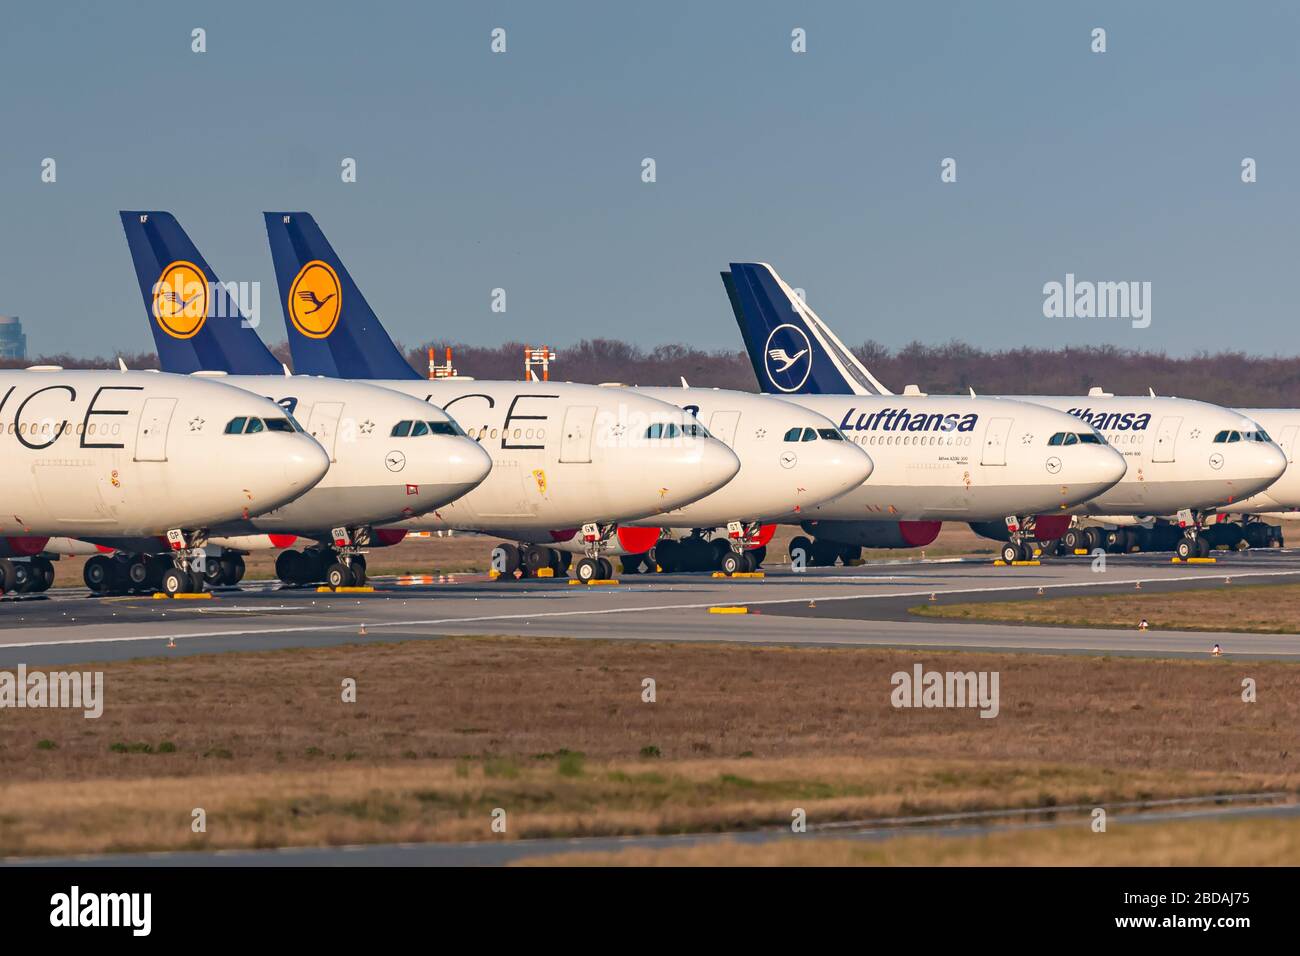 Frankfurt, Germany - April 7, 2020: Lufthansa Airbus A330 and A340 grounded and stored at Frankfurt airport (FRA) in the Germany. Airbus is an aircraf Stock Photo